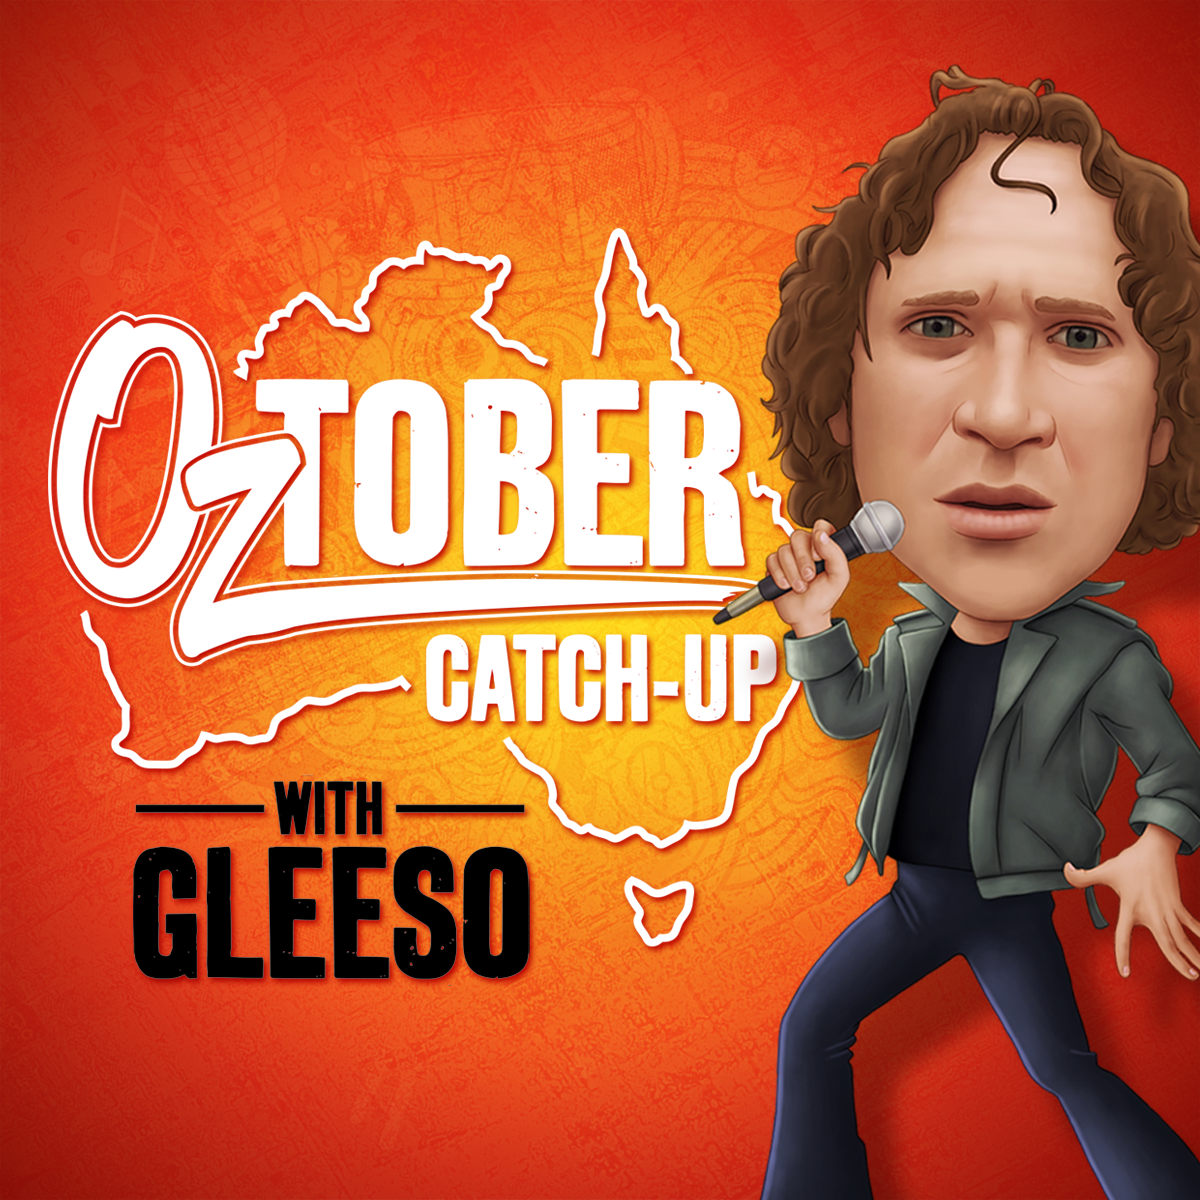 Oztober Catch-Up with Gleeso - Brian Canham from Psuedo Echo